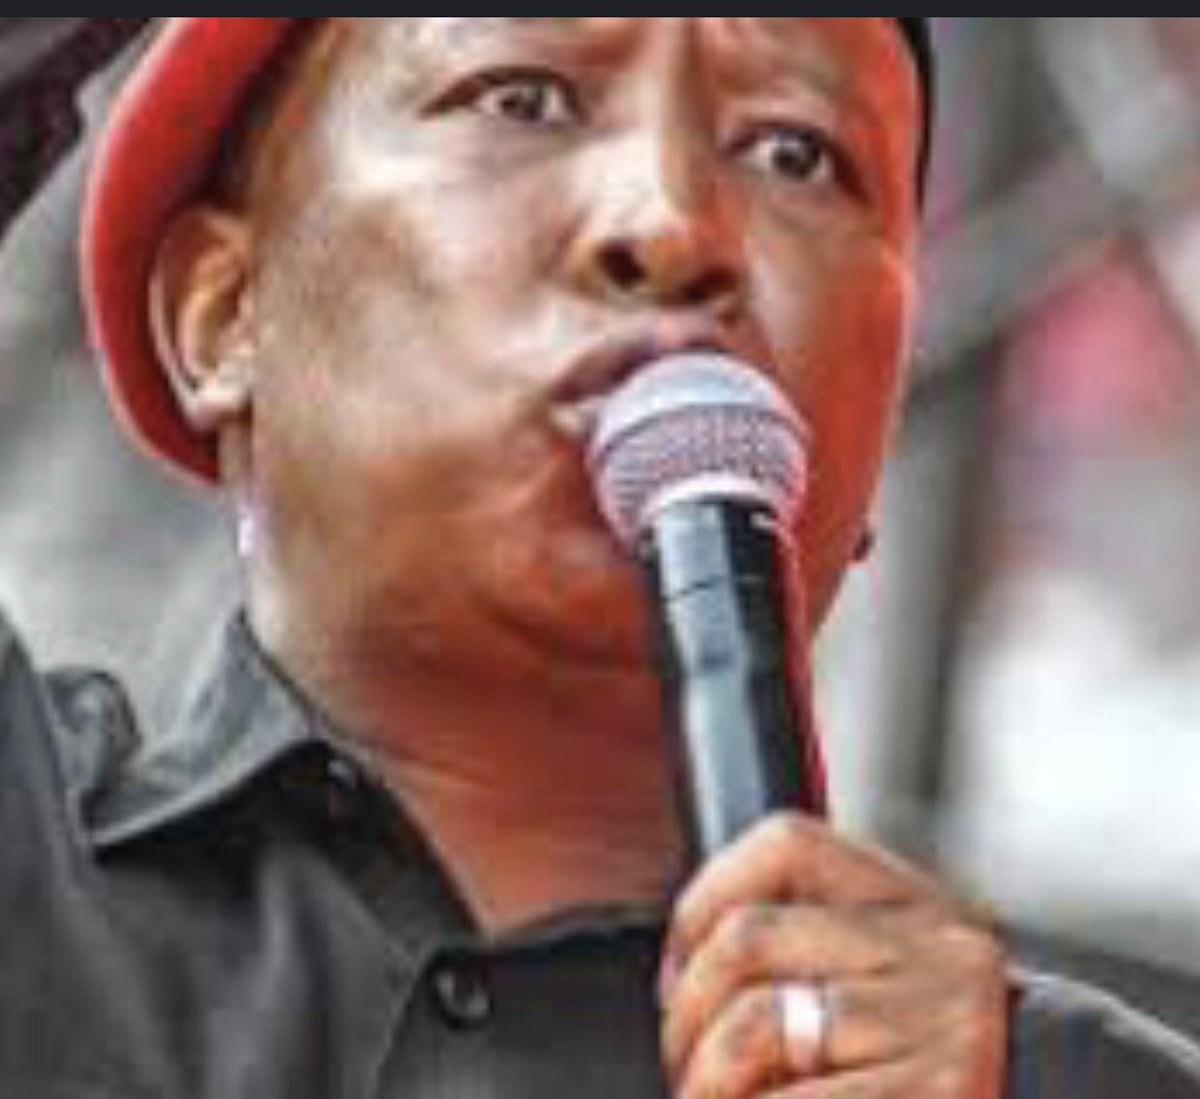 Julius Malema was hypomanic yesterday while campaigning in Soweto. Ranting and raving like a lunatic. Grievance, false narratives, unsupported allegations, projections. He is FEAR PERSONIFIED. I don't know which word describes him more - dysfunctional or desperate. For the first…